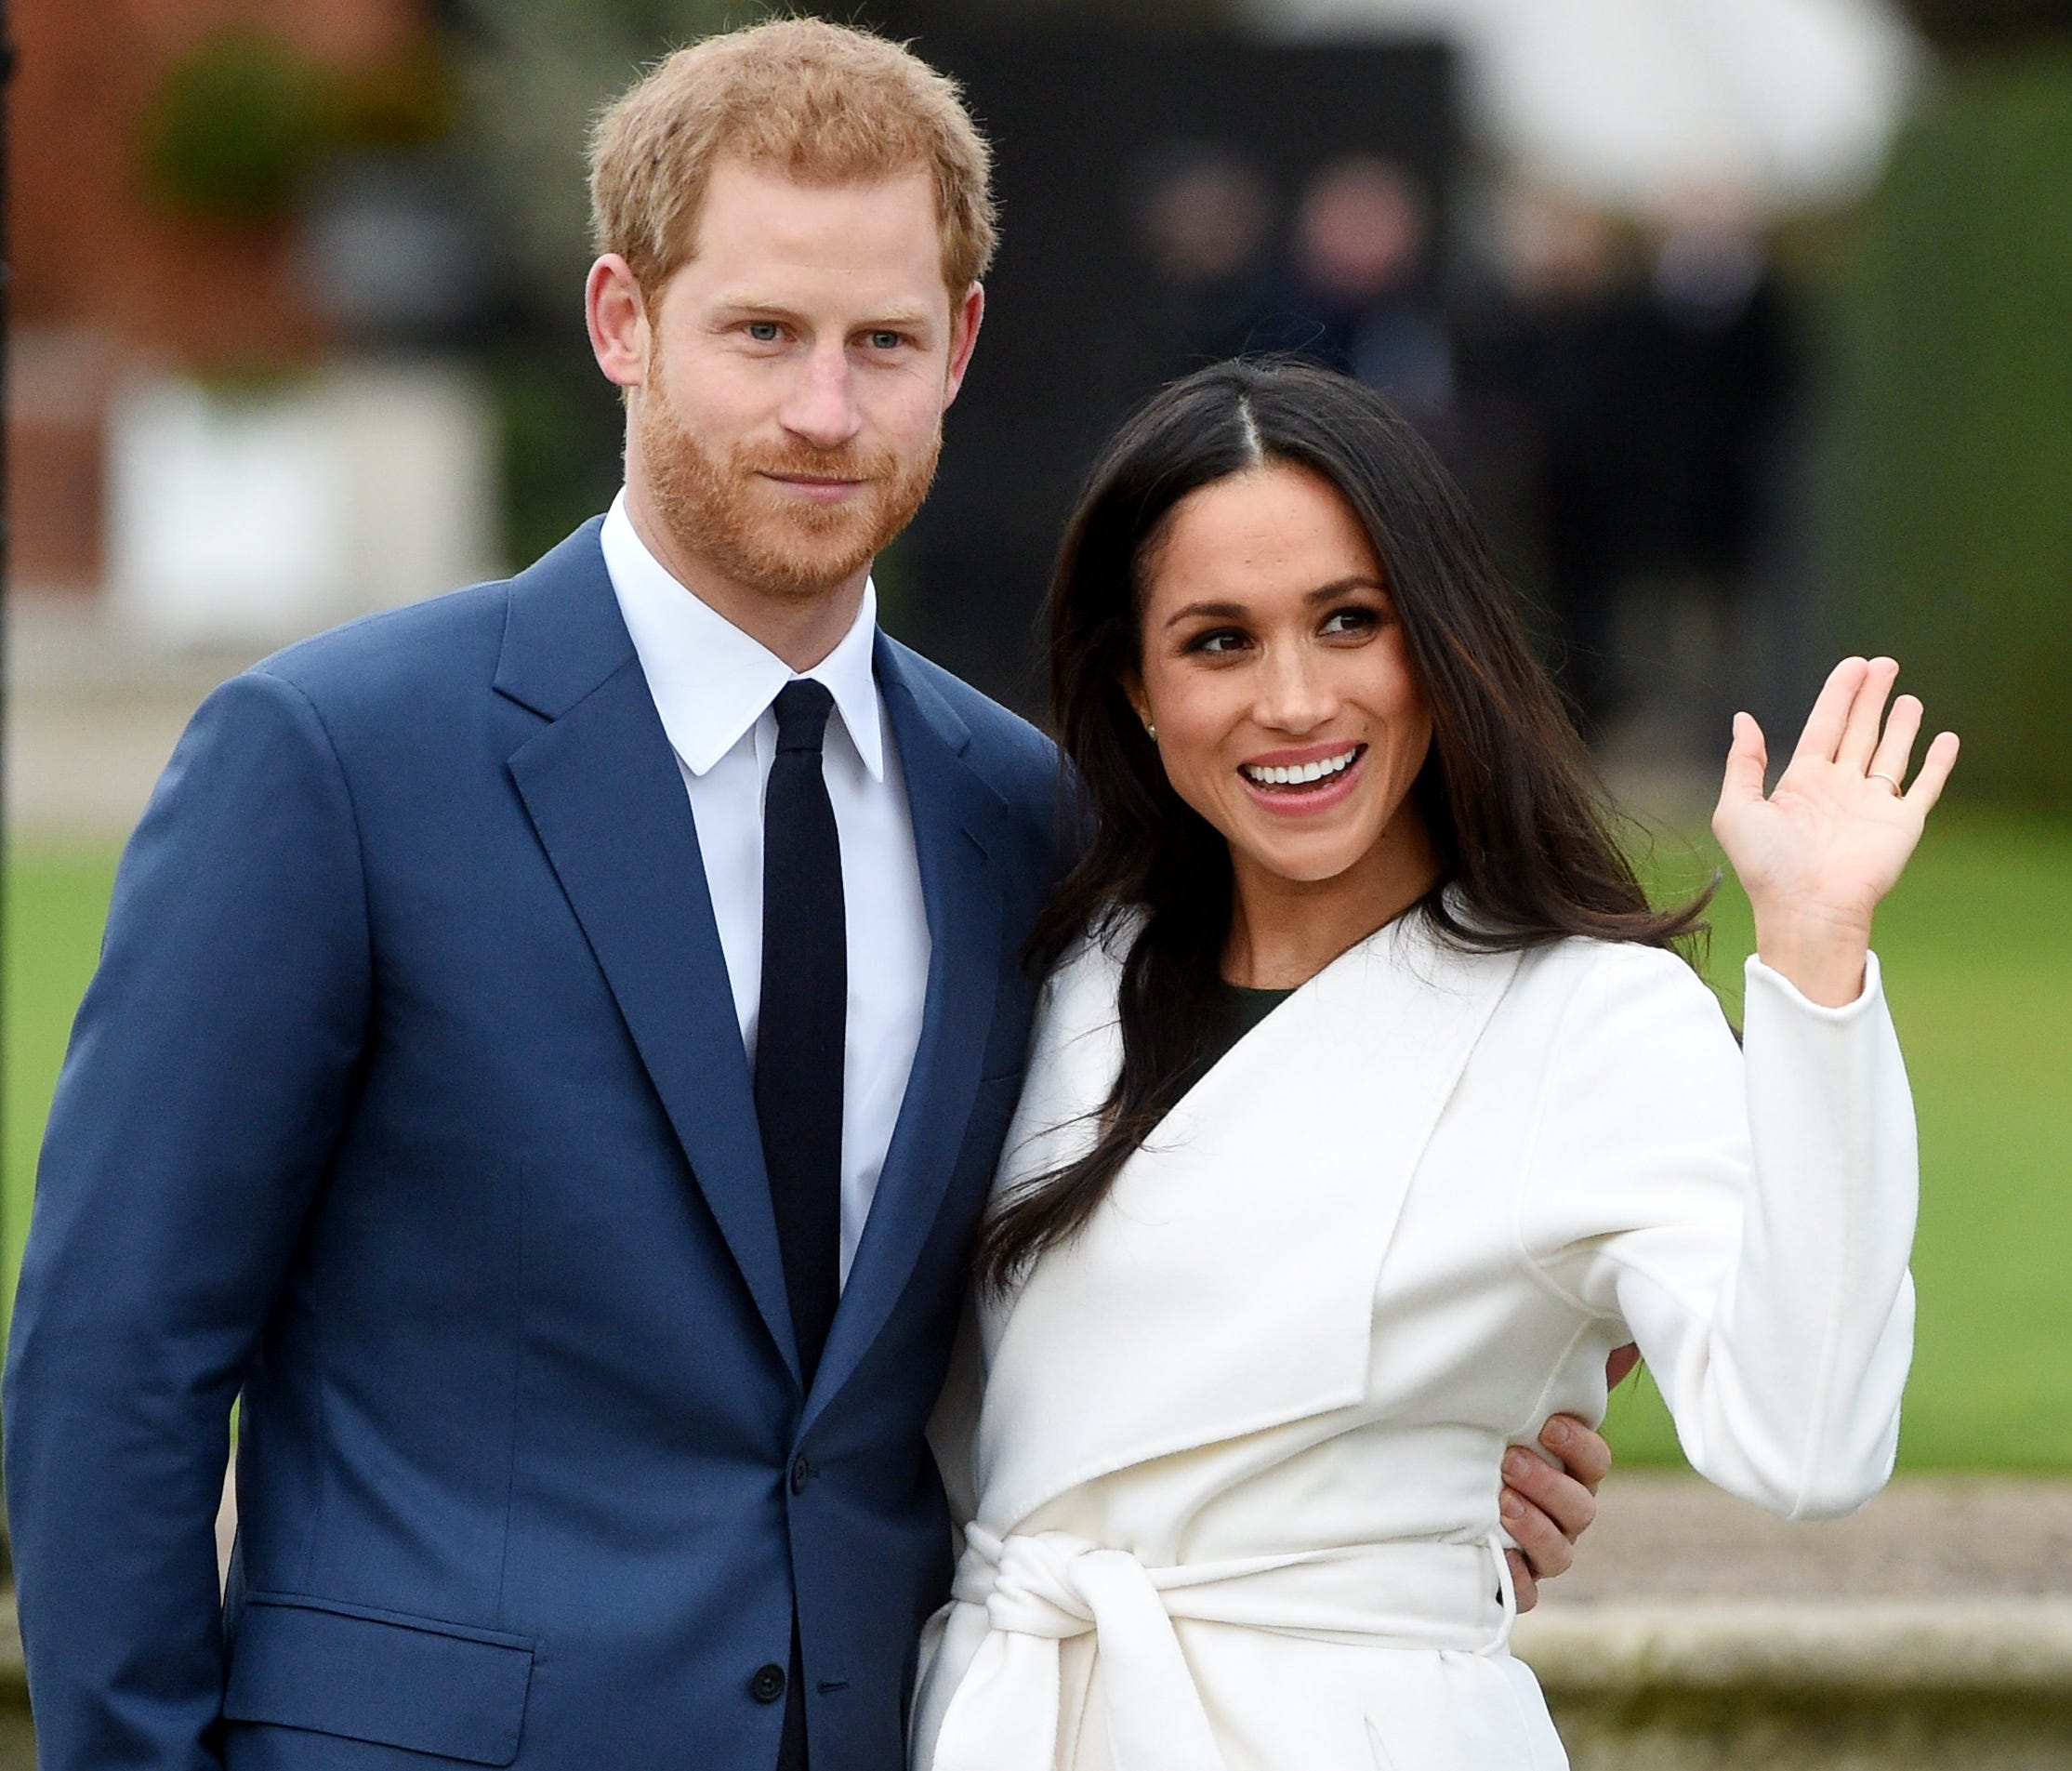 Britain's Prince Harry pose with Meghan Markle during a photocall after announcing their engagement in the Sunken Garden in Kensington Palace in London.